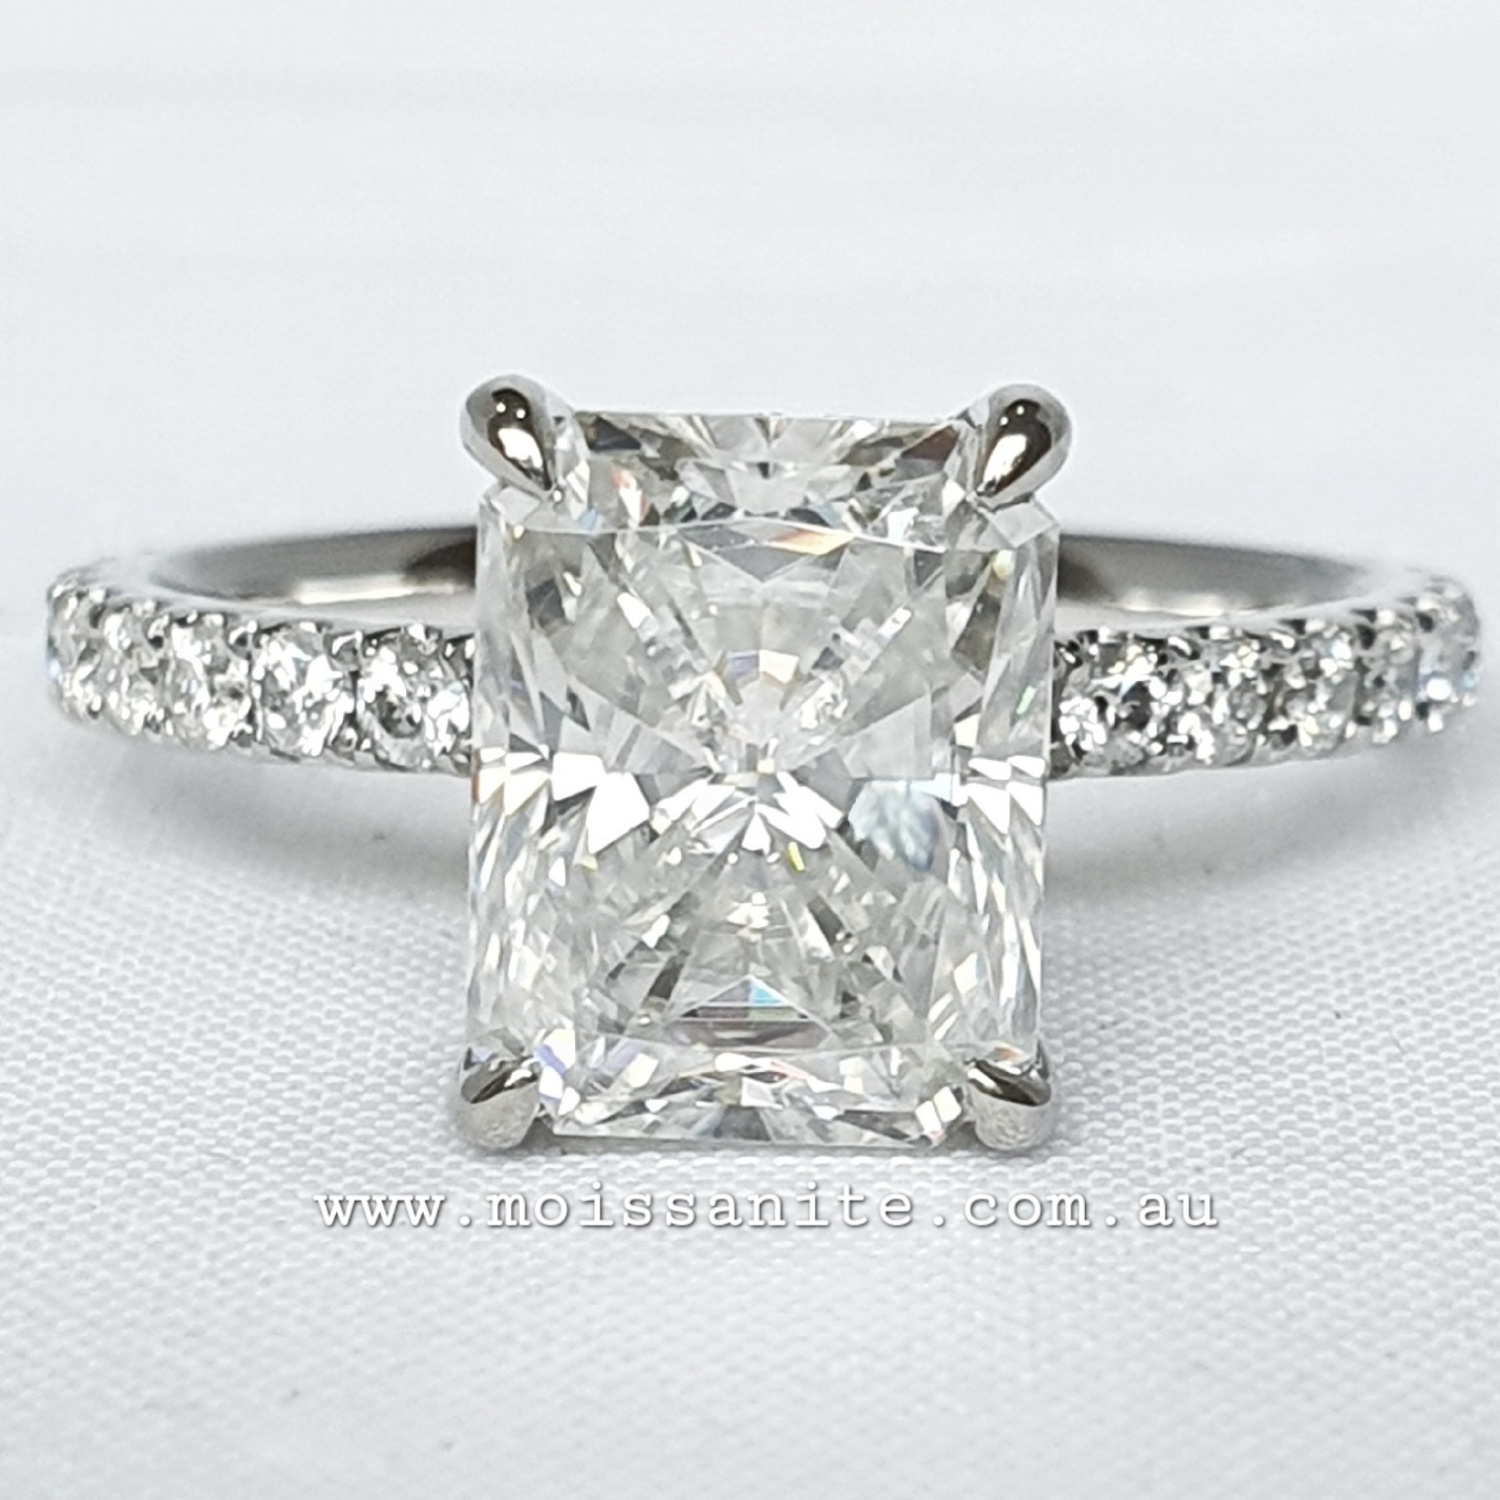 How to pair a radiant cut engagement ring with a wedding band